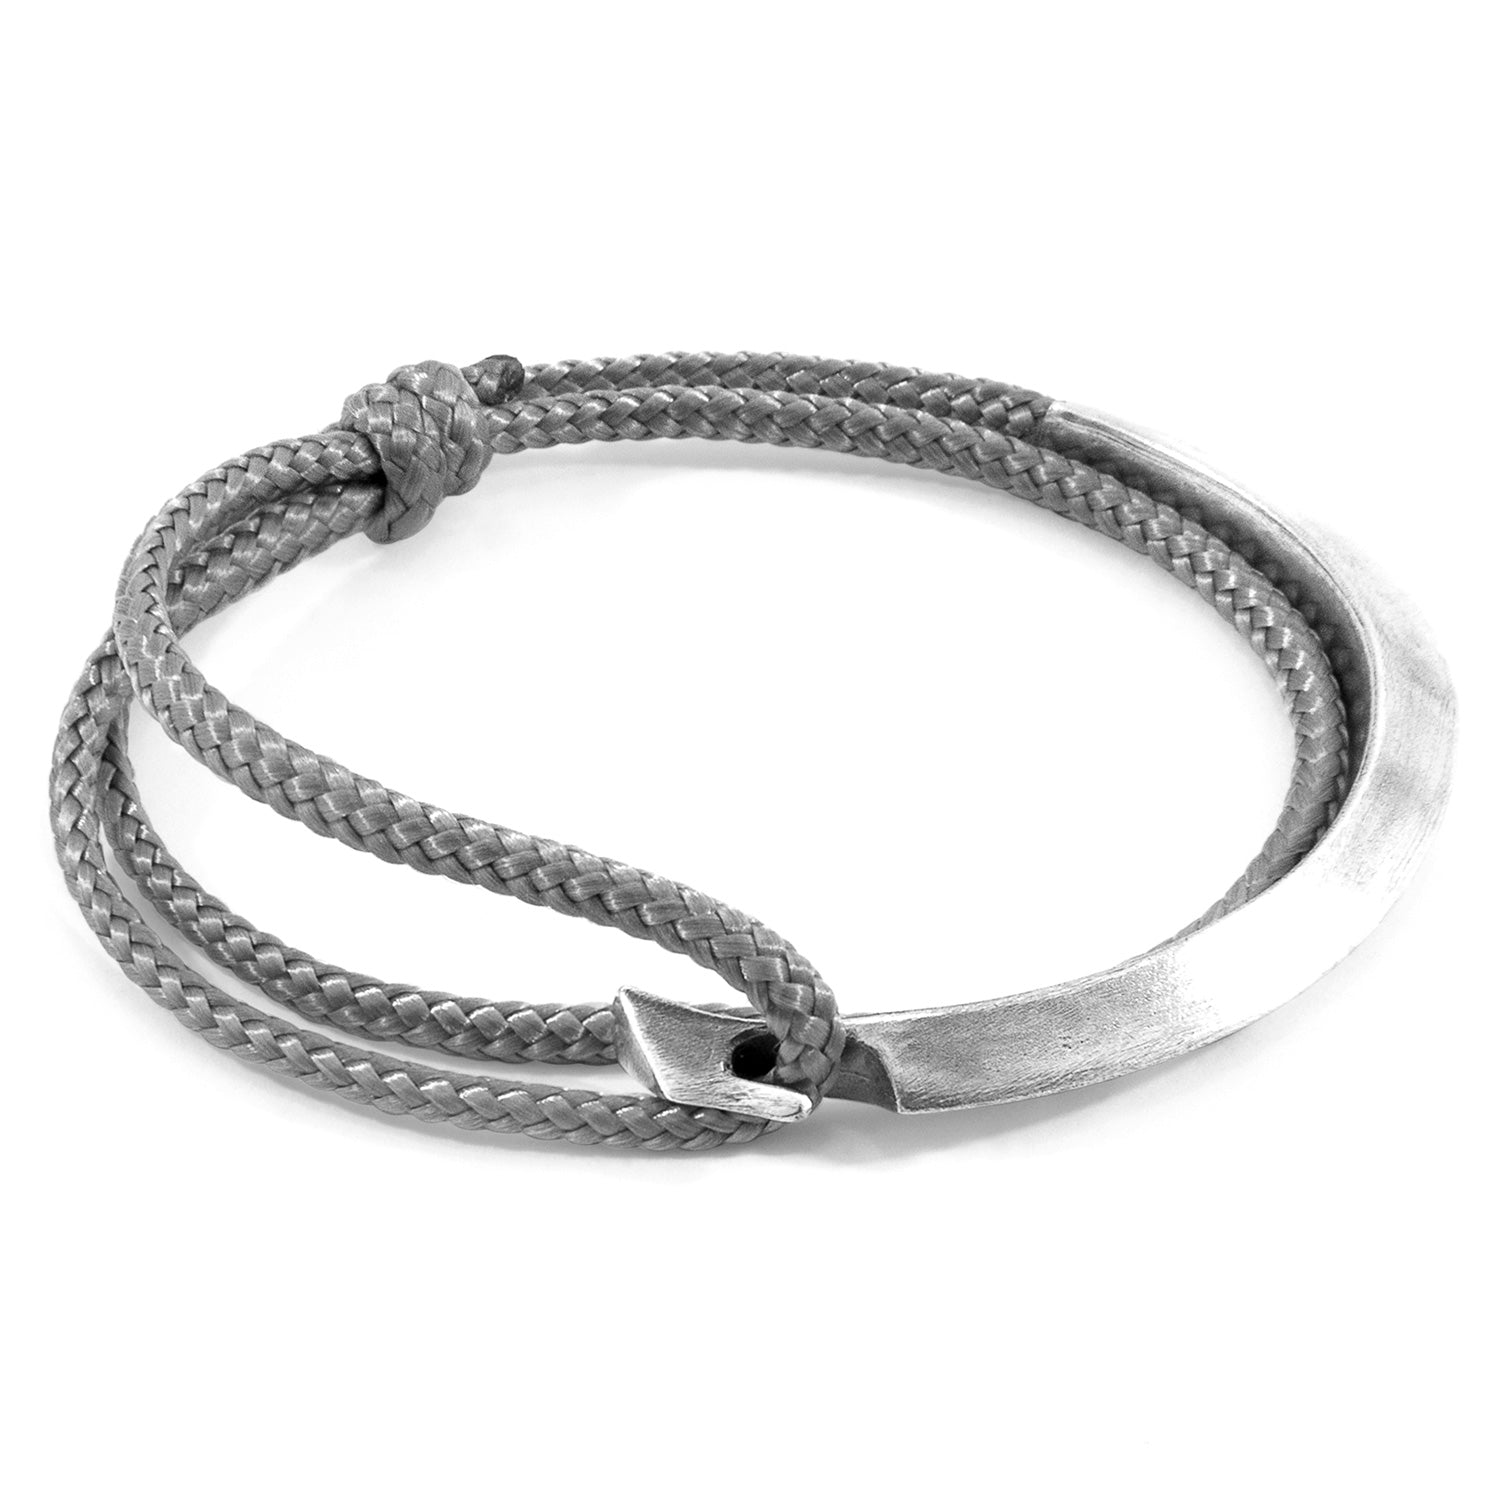 Minimalist Grey Silver Rope Bracelet - Handcrafted in Great Britain
This ANCHOR & CREW bracelet features a solid .925 sterling silver bangle barrel and 3mm diameter performance Marine Grade polyester and nylon rope. The one-size-fits-all design allows - Bracelets - Bijou Her -  -  - 